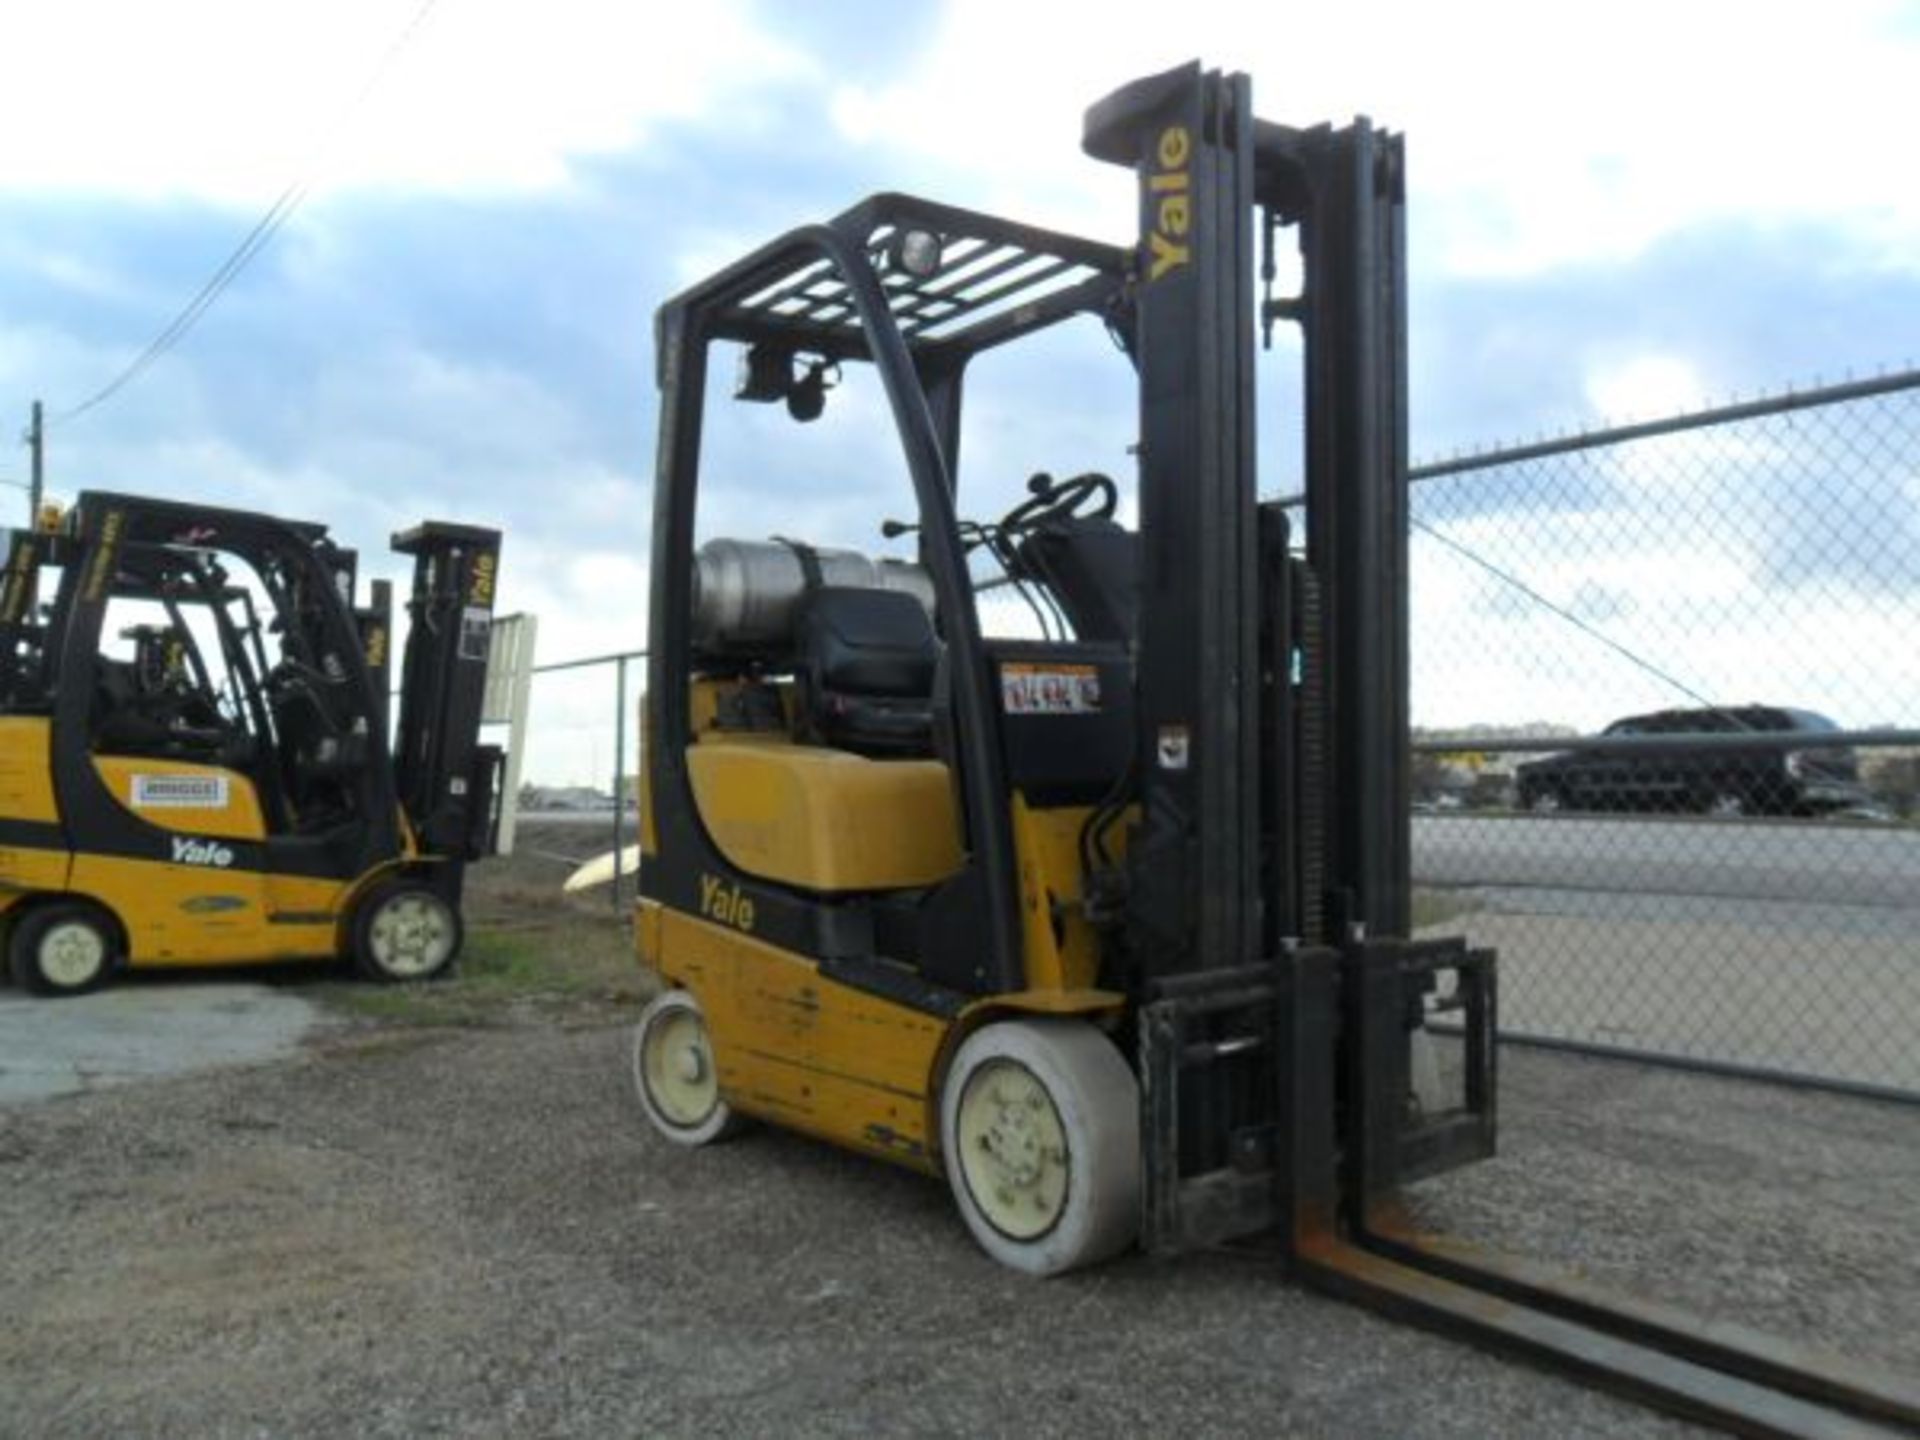 3,000 LB YALE MODEL GLC030VXNURE082 SOLID TIRE LP GAS LIFT TRUCK; S/N C809V01648C, 3-STAGE MAST, 82" - Image 3 of 4